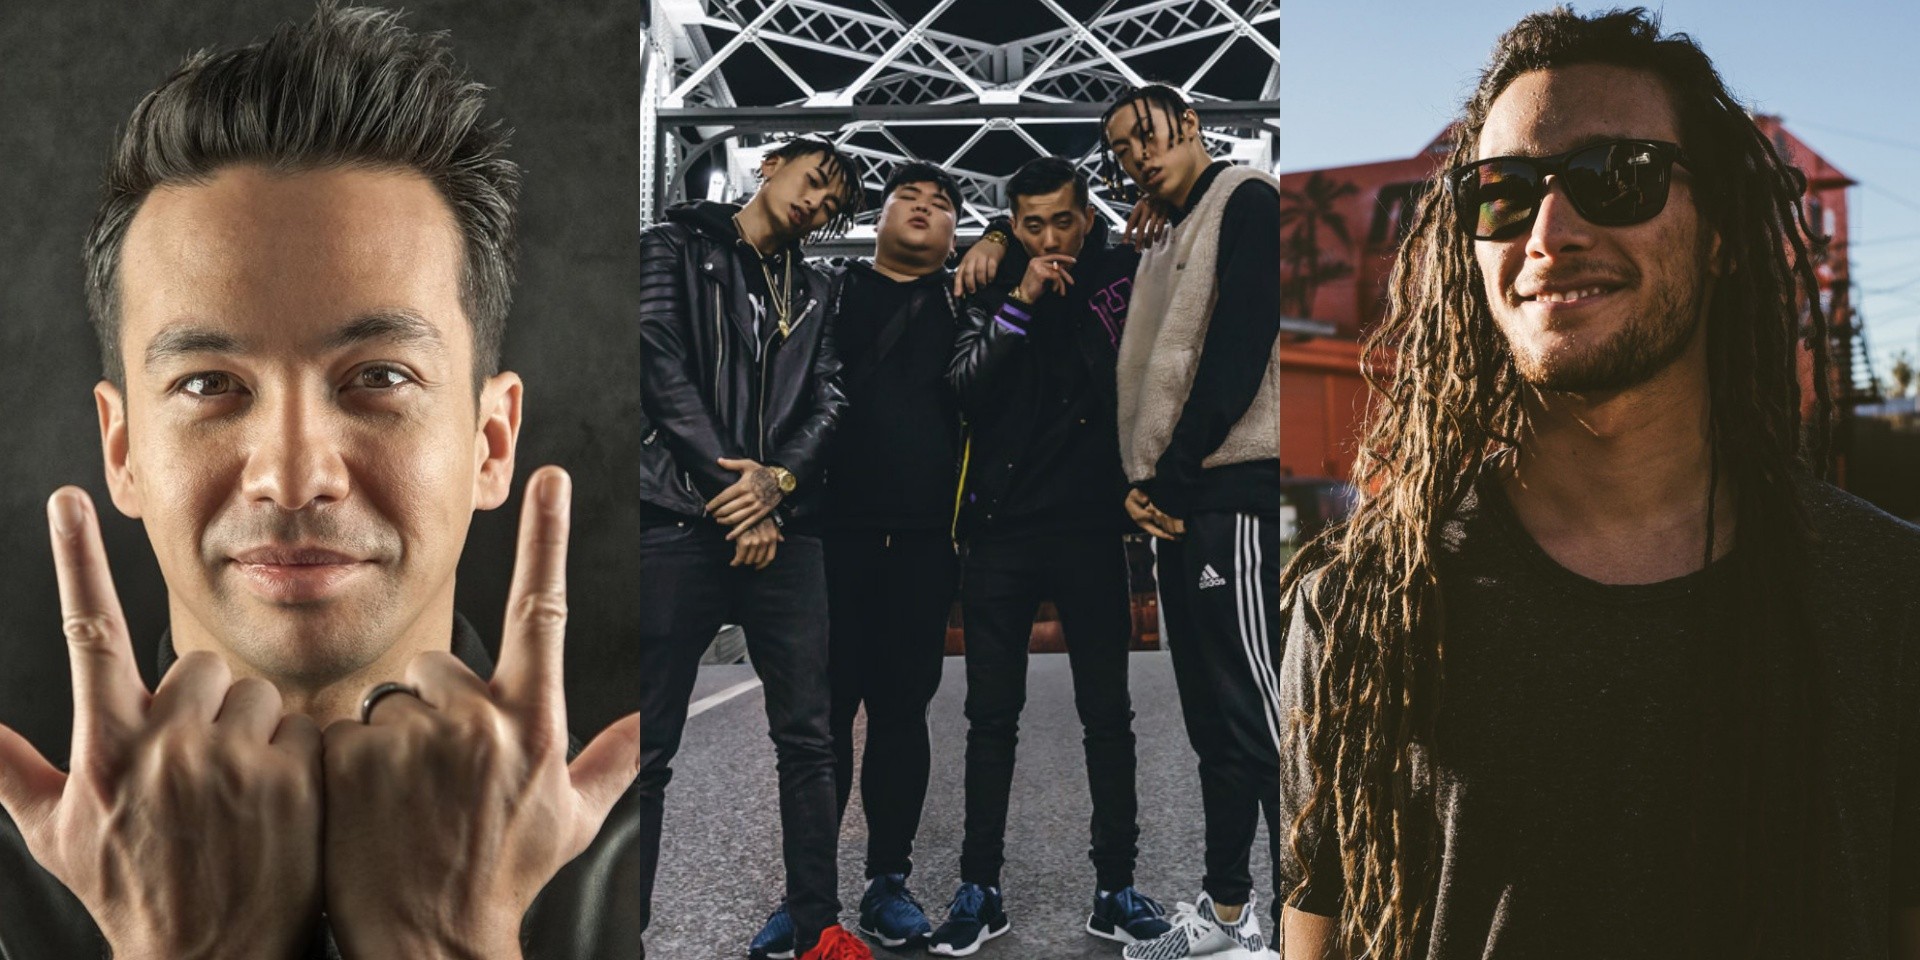 Skechers Sundown Festival 2019 announces lineup: Laidback Luke, Higher Brothers, Henry Fong and more confirmed